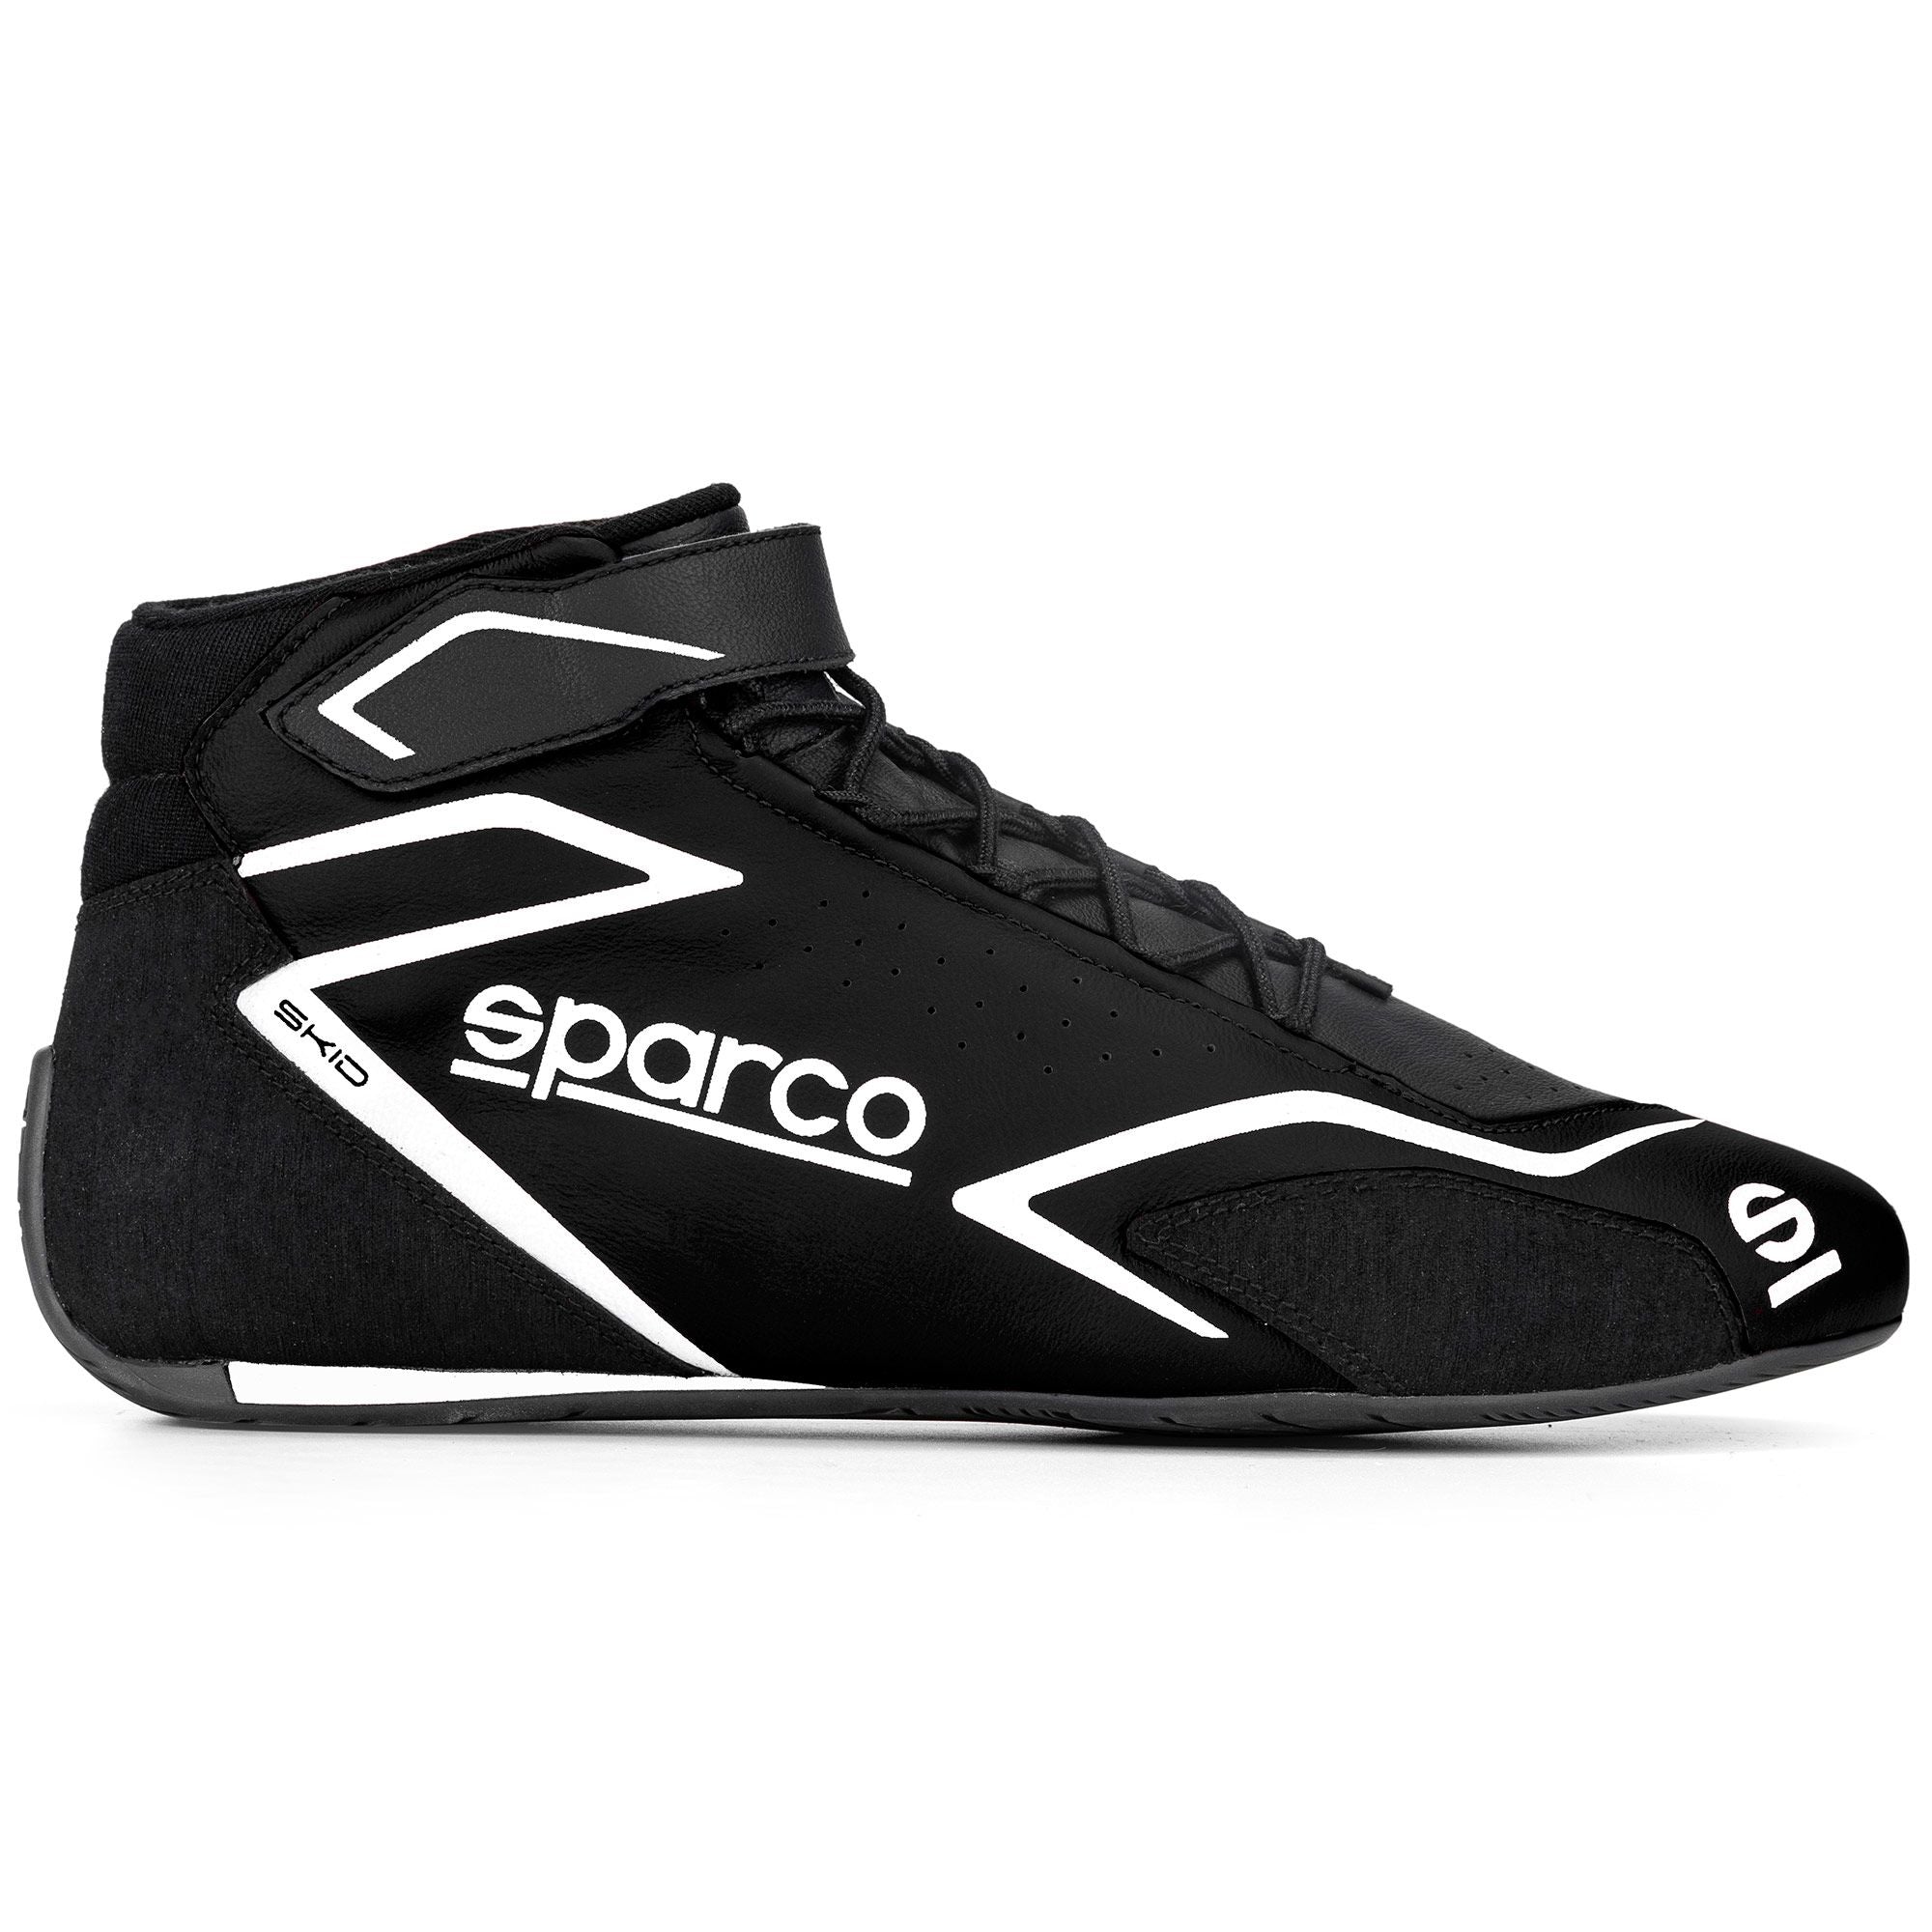 Sparco Skid Shoes - Saferacer